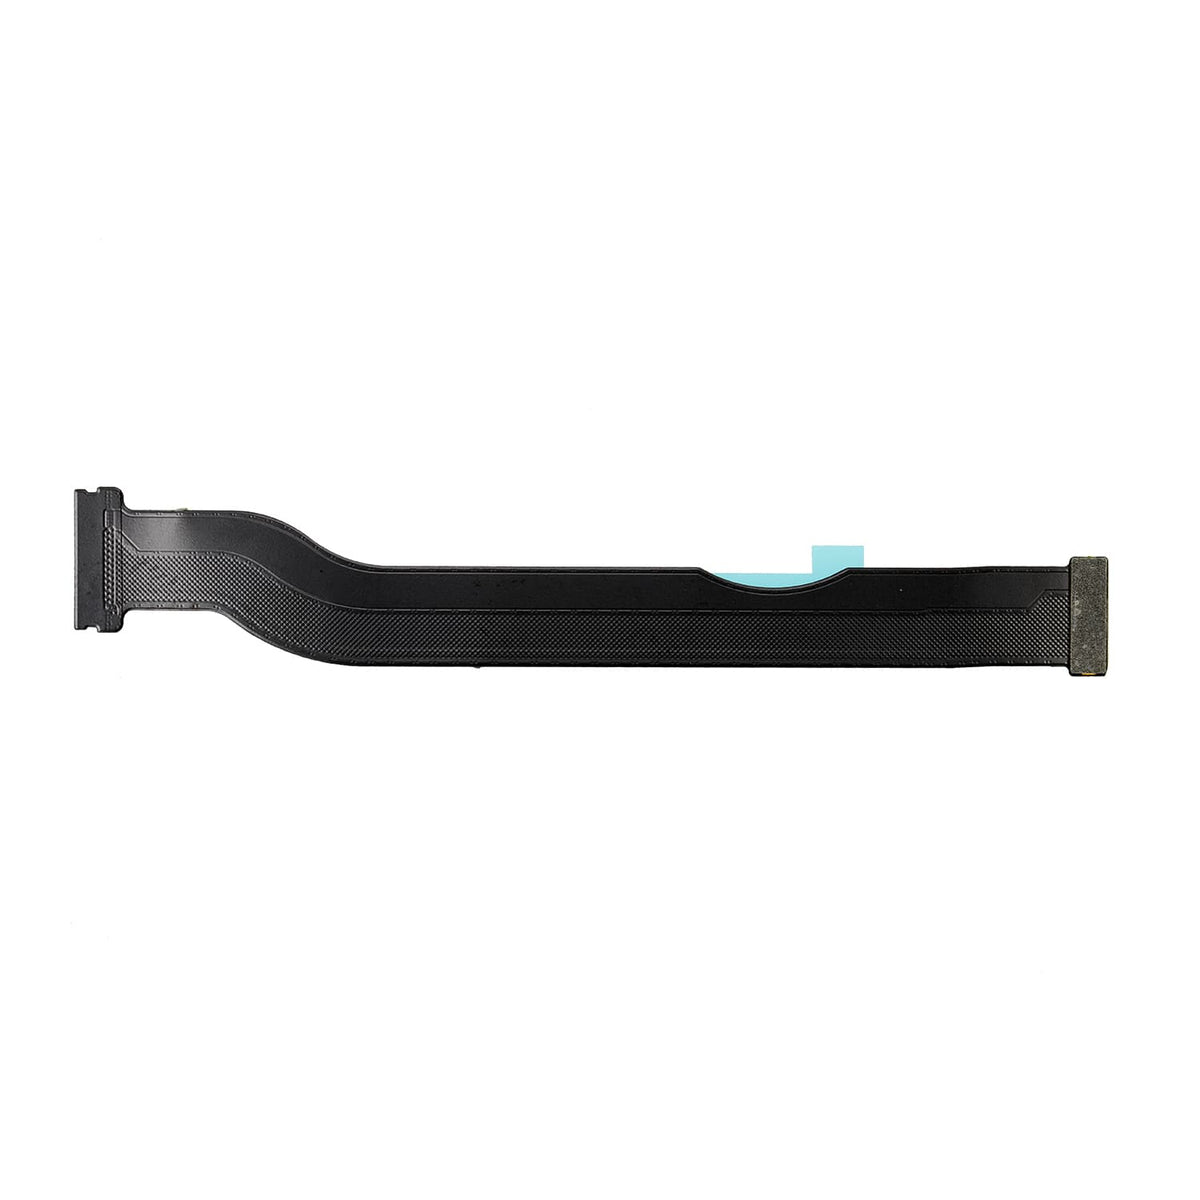 AUDIO BOARD RIBBON CABLE FOR MACBOOK AIR 13" A1932 (LATE 2018-MID 2019)